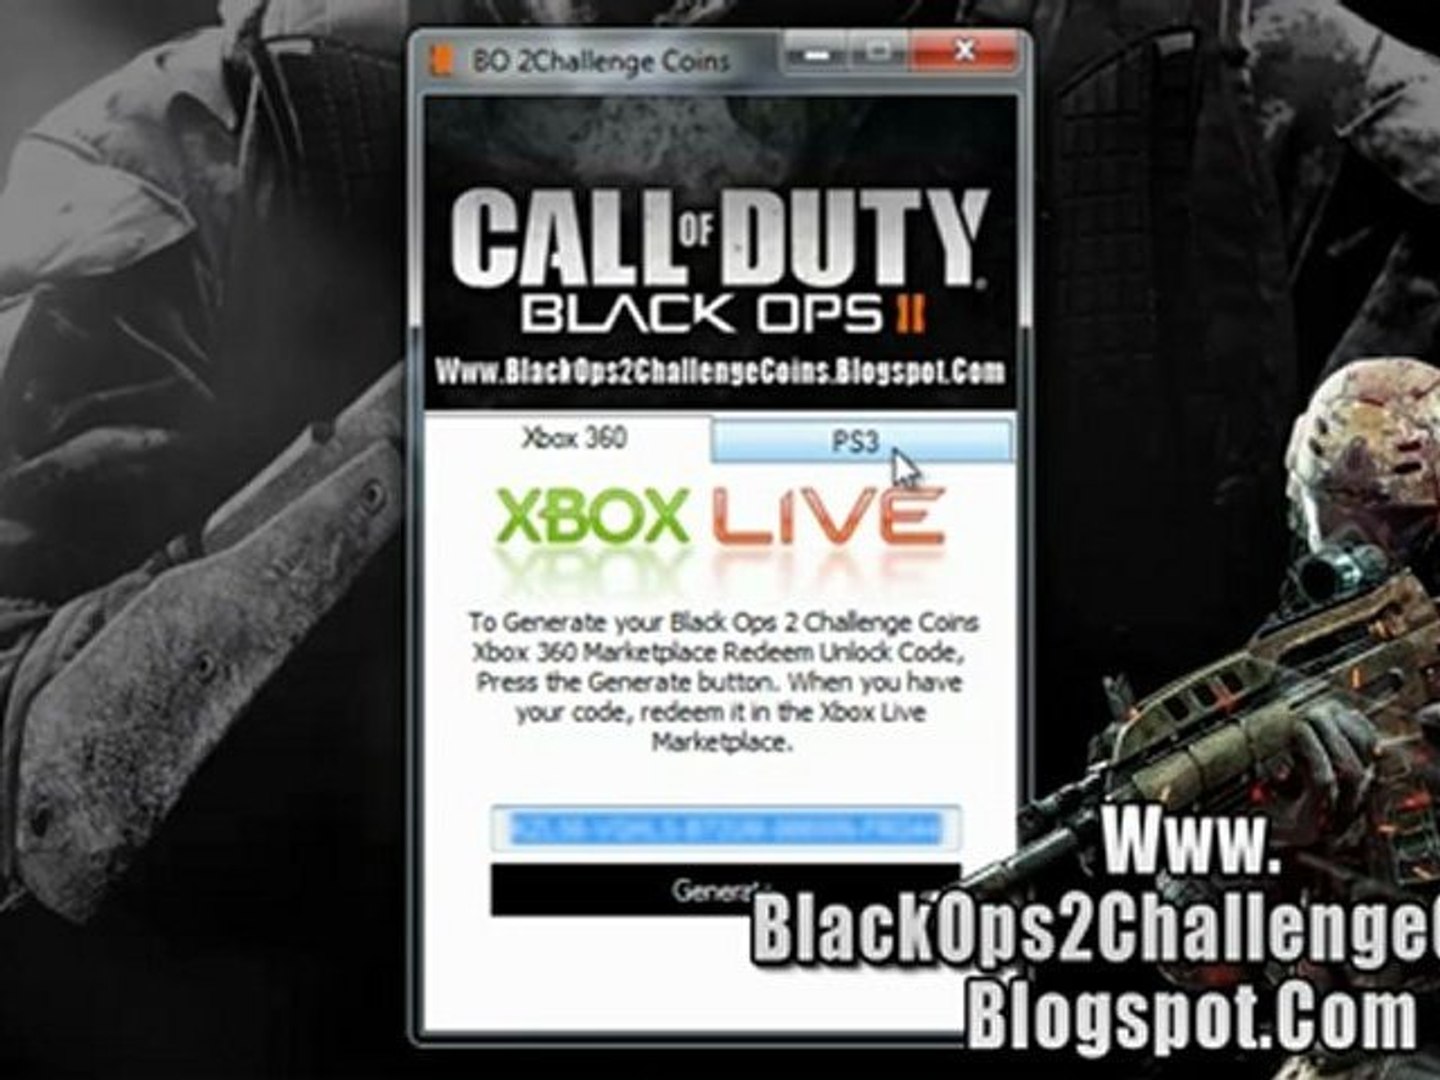 continuar Radioactivo níquel Get Free Black Ops 2 Challenge Coins Redeem Code - Xbox 360 - PS3 - video  Dailymotion